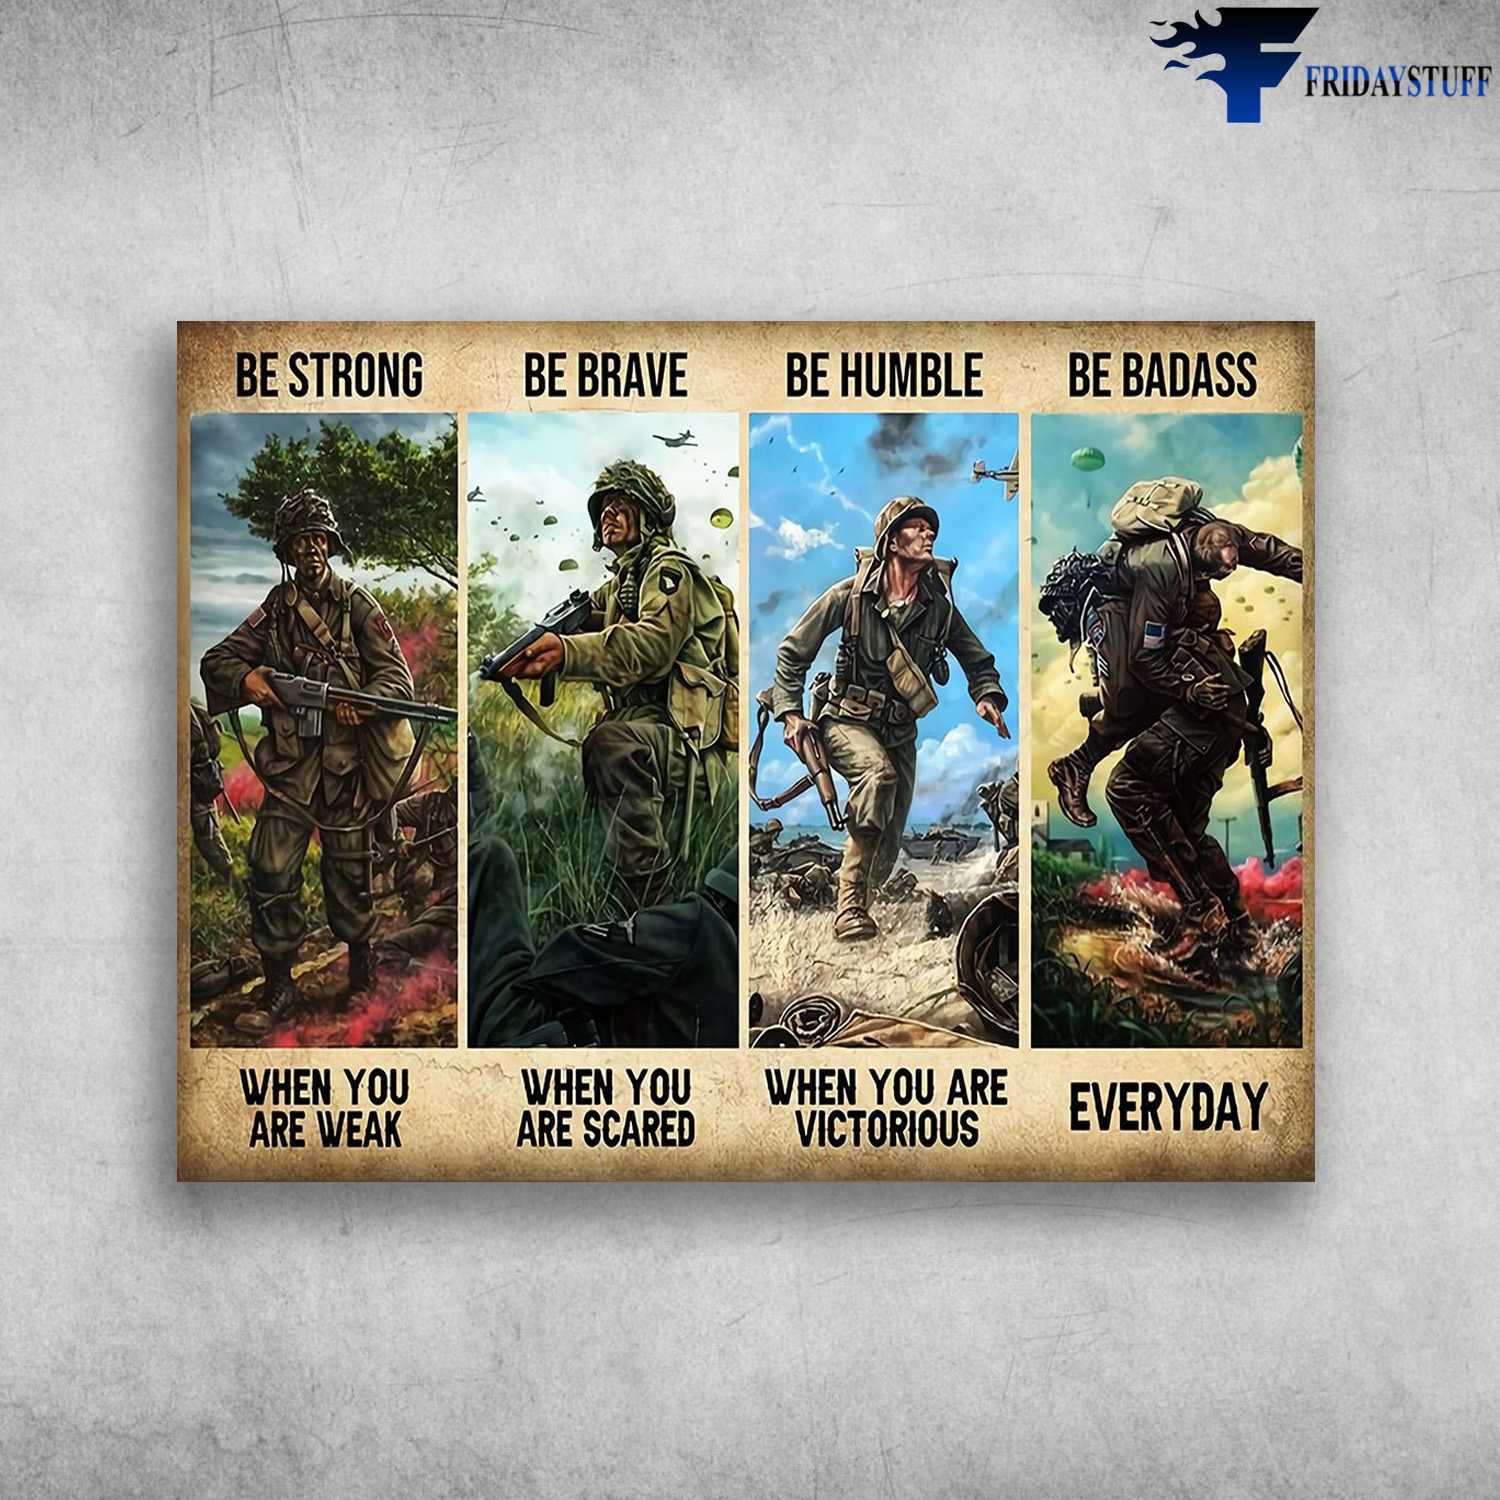 Soldier Poster, War Poster, Be Strong When You Are Weak, Be Brave When You Are Scared, Be Humble When You Are Victorious, Be Badass Everyday